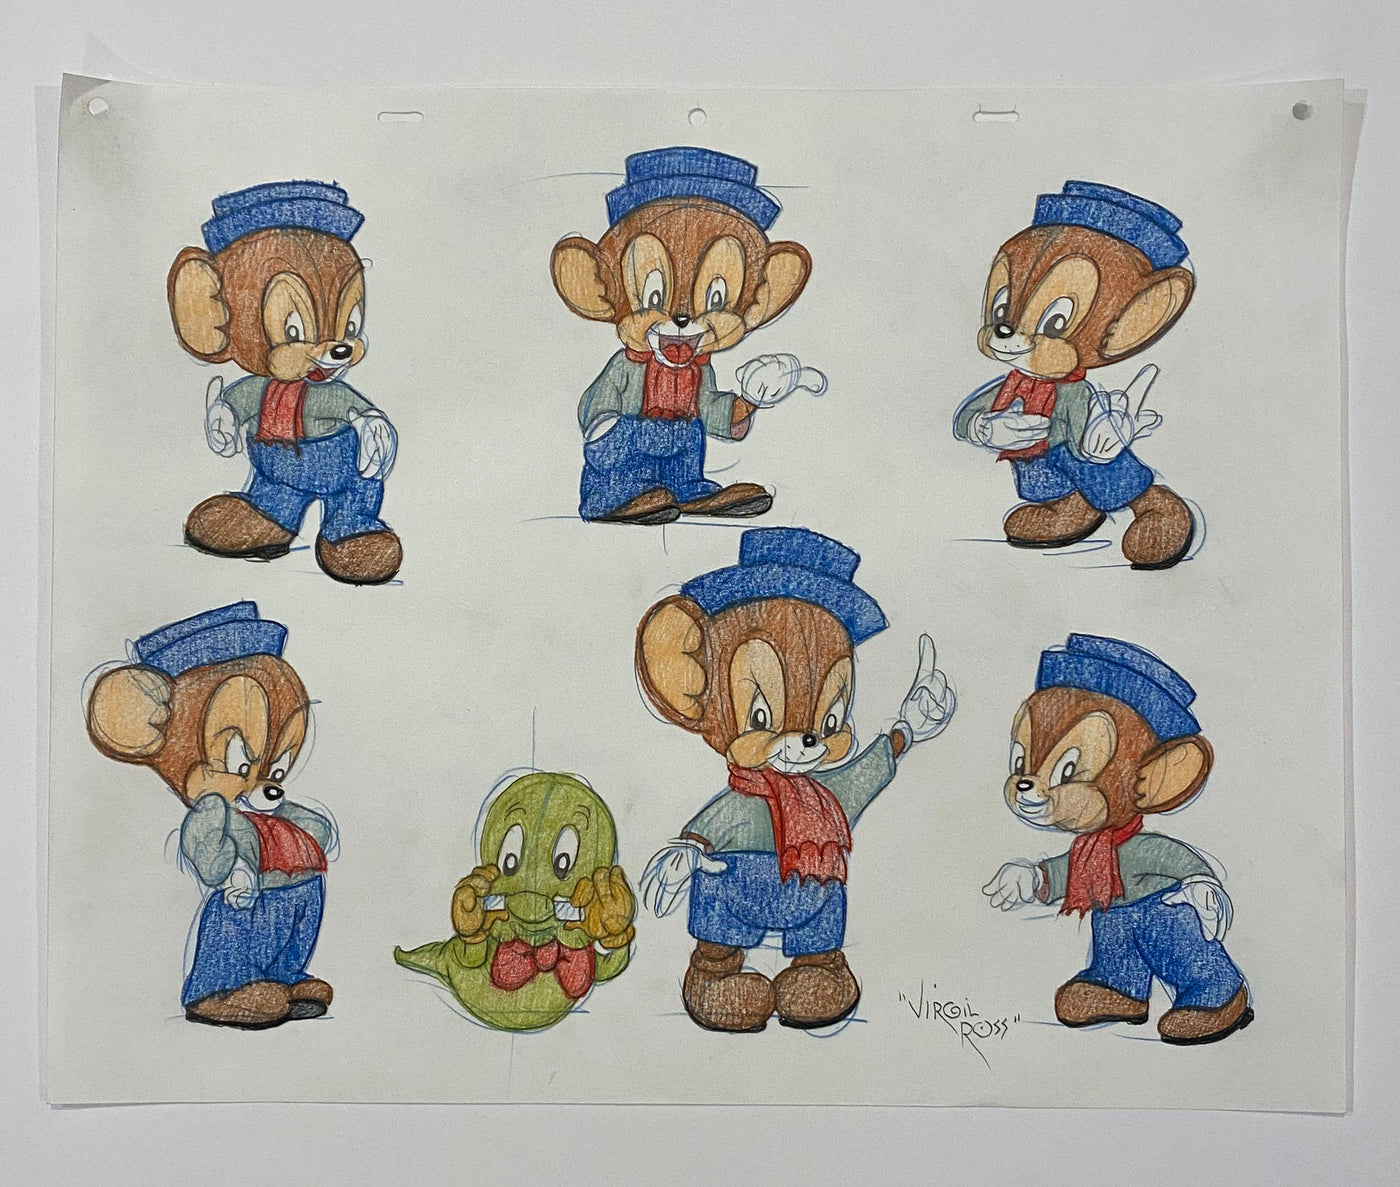 Original Warner Brothers Virgil Ross Model Sheet Animation Drawing featuring Sniffles the Mouse and Bookworm